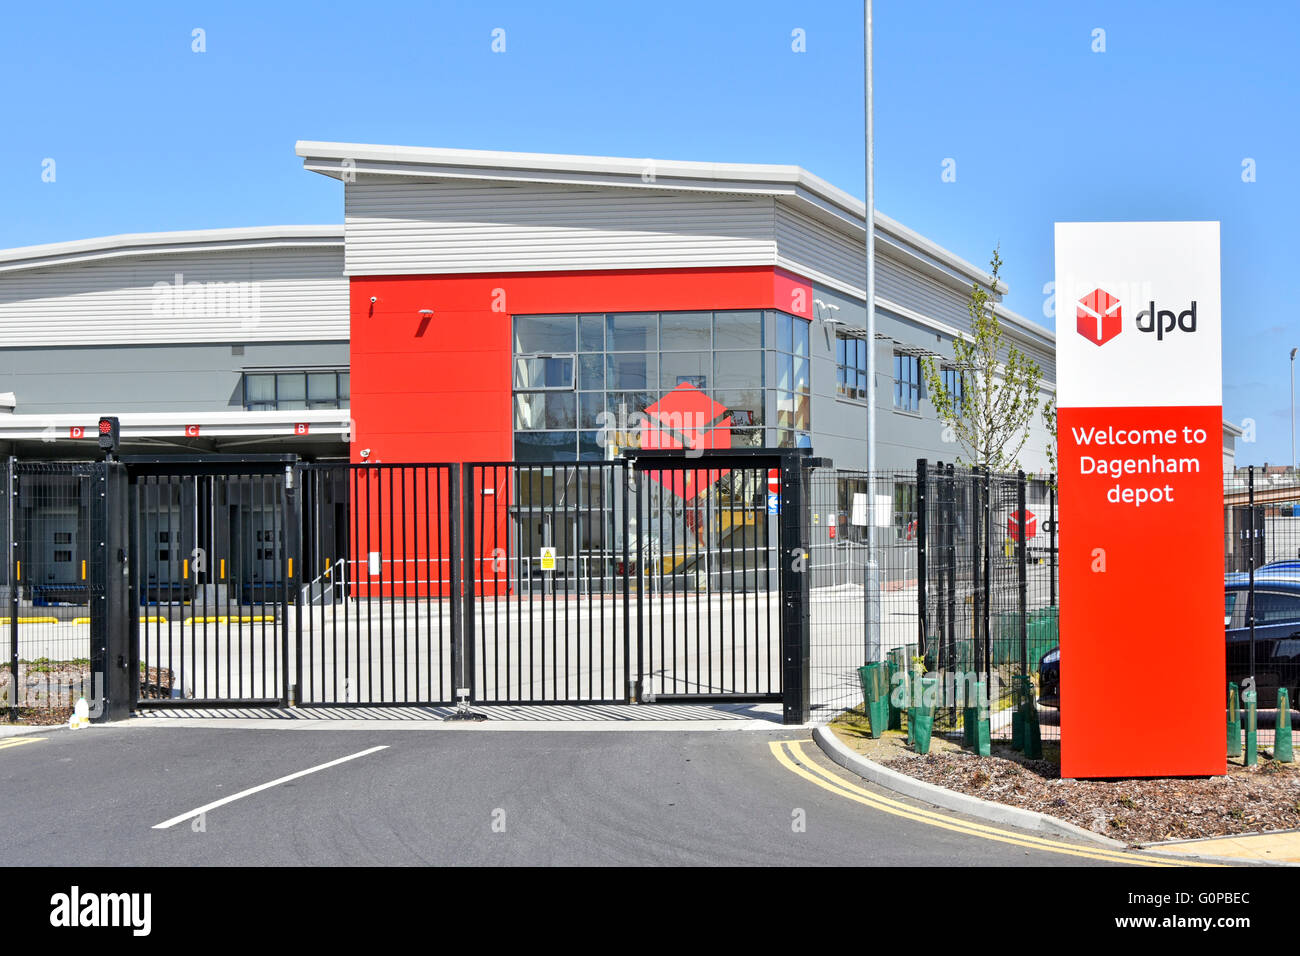 Transportation logistics DPD secure parcel sorting & distribution depot with warehouse entrance Dagenham East London England UK with welcome sign Stock Photo